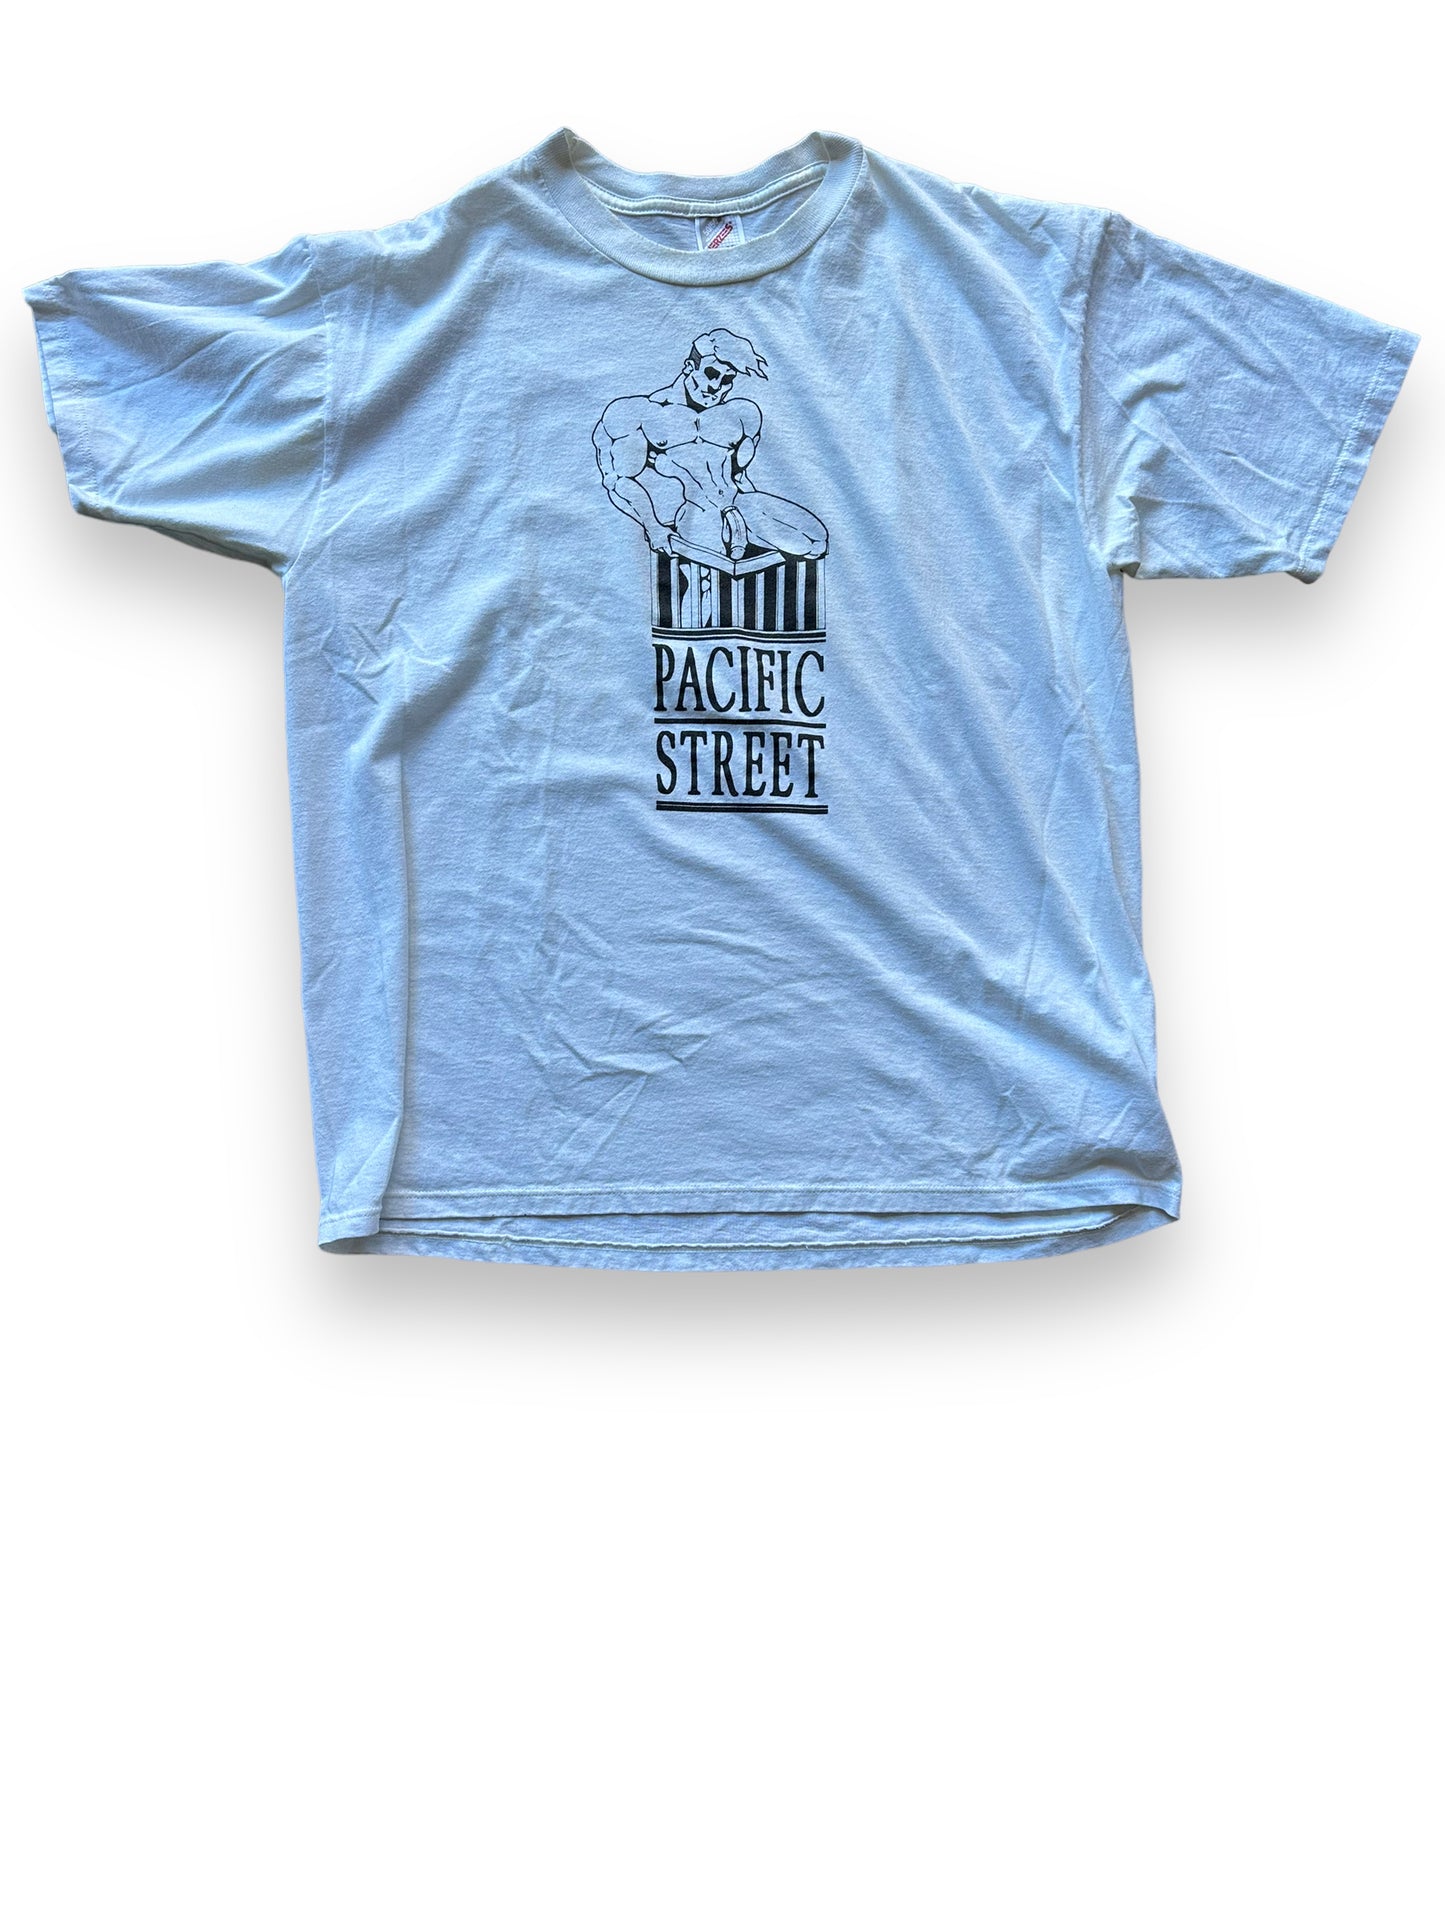 Front of Vintage Pacific Street Tee SZ XL | Vintage T-Shirts Seattle | Barn Owl Vintage Tees Seattle